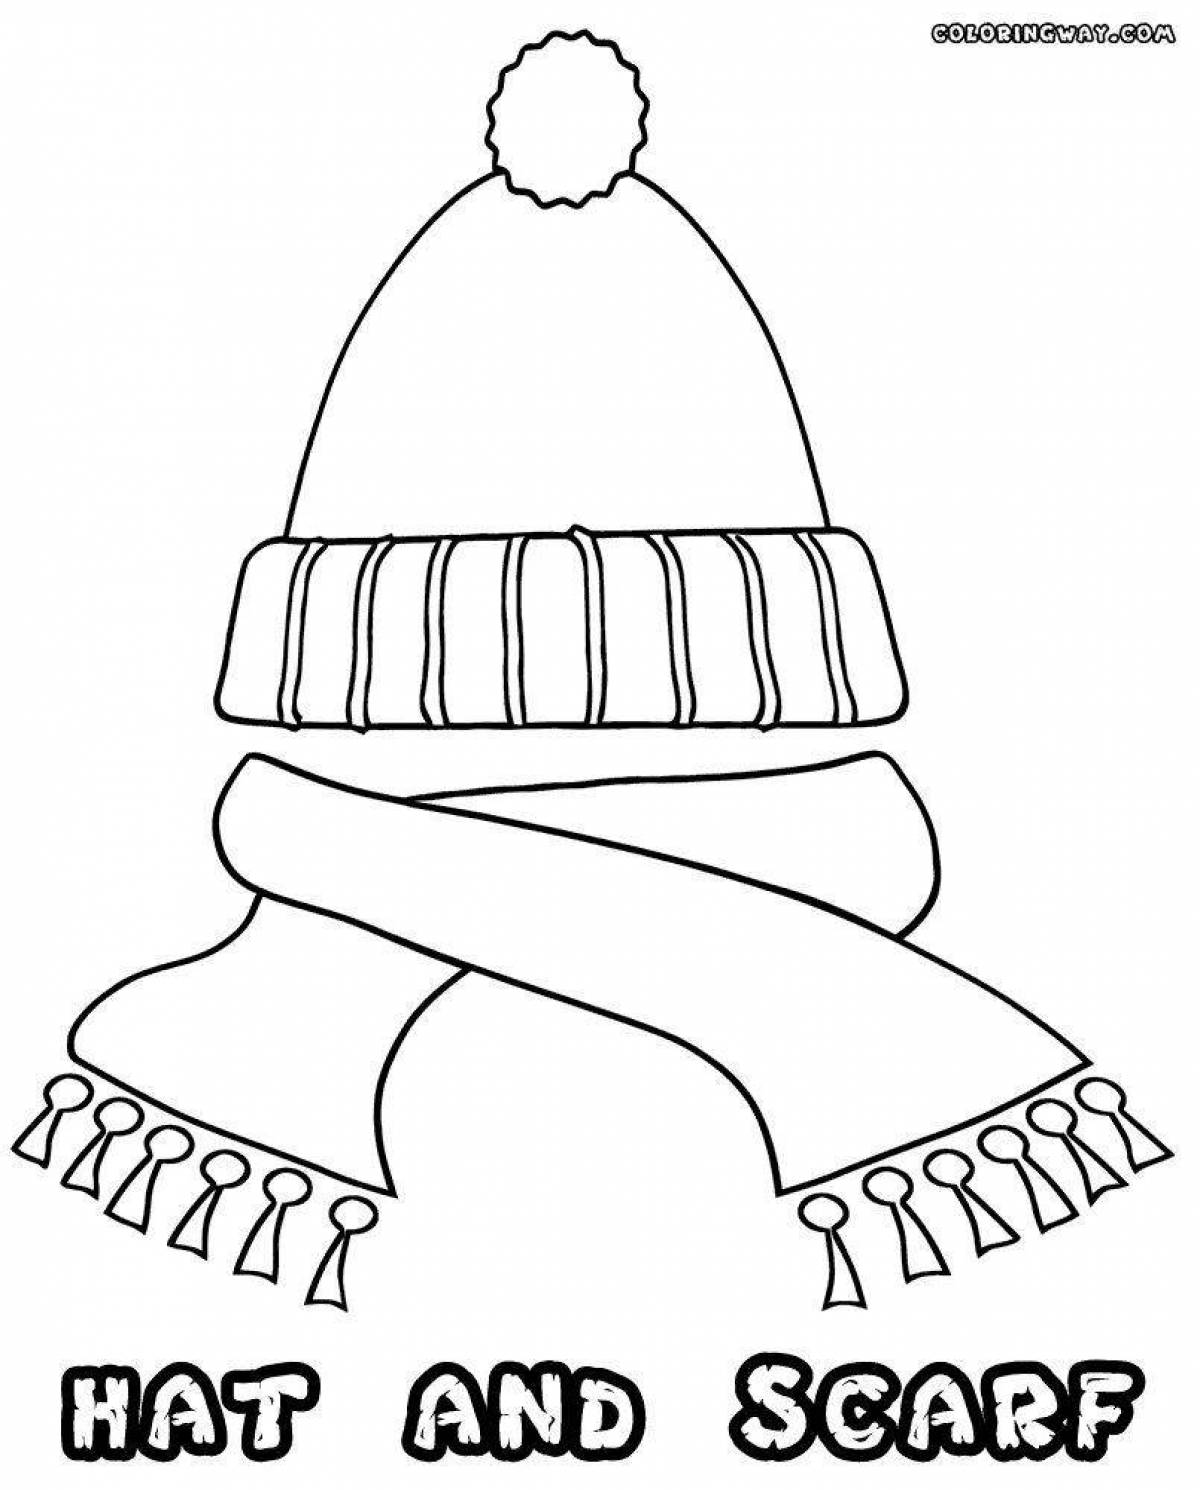 Coloring book warm hat and mittens